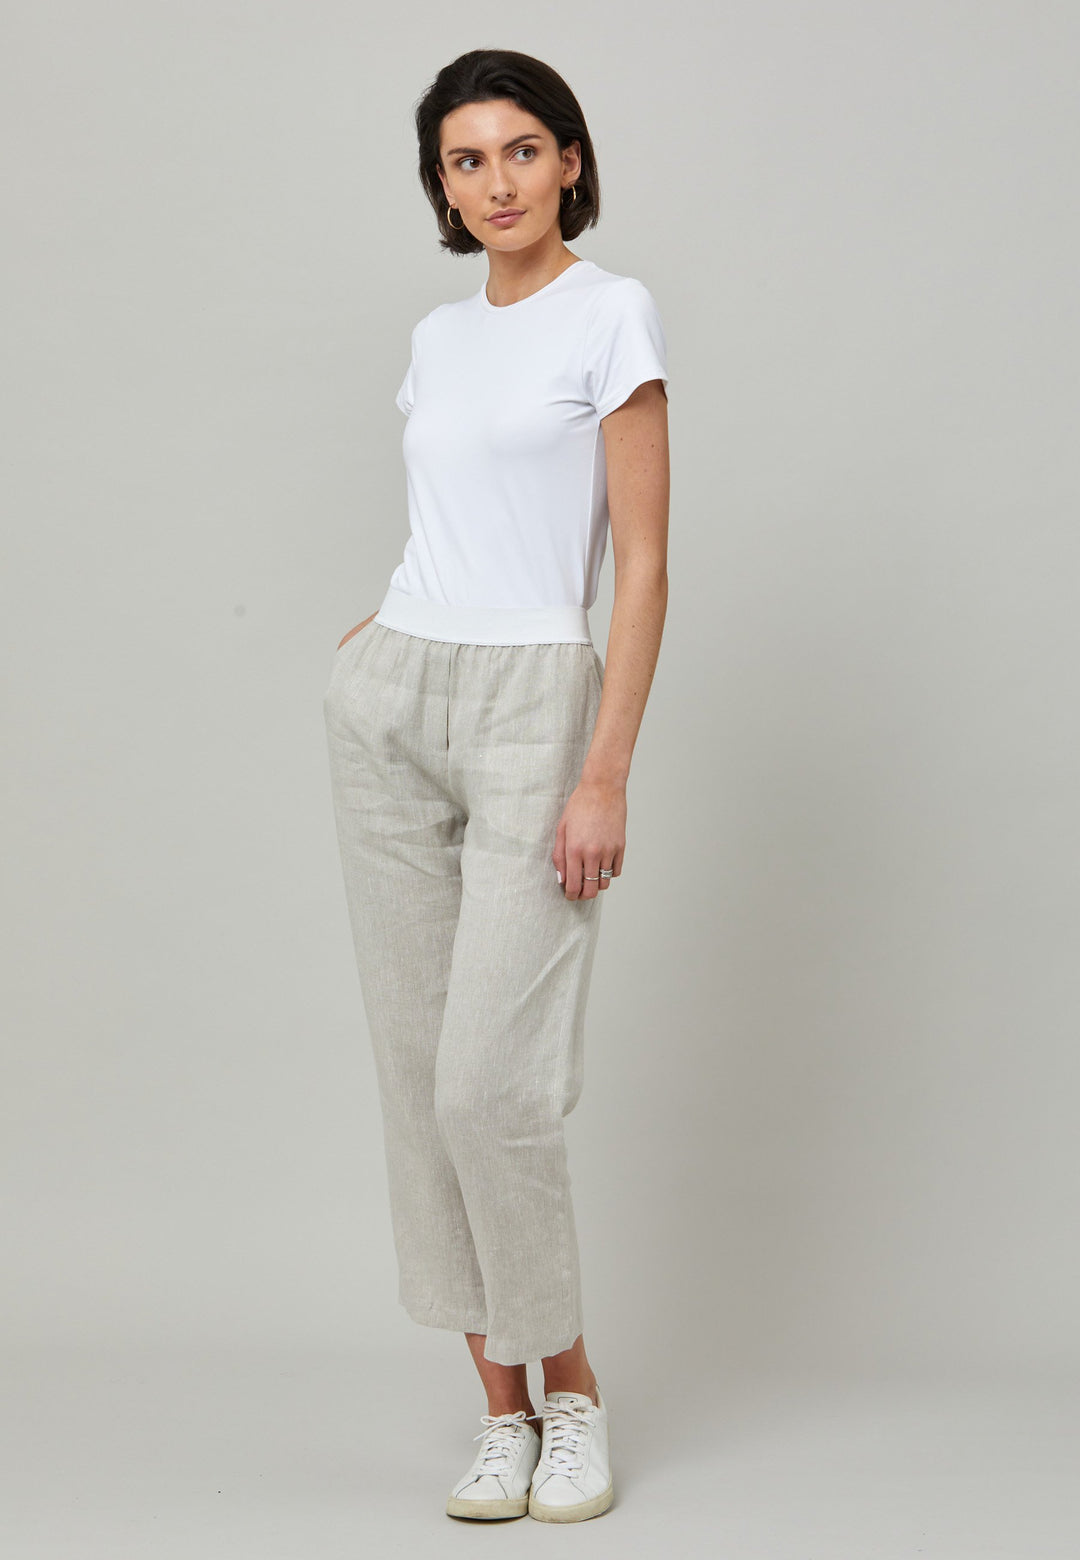 Choose the Vanessa oatmeal pant. A loose-fitting, pull-on linen pant that captures a laid-back spirit. An essential piece for your travels. Designed to sit at the high waist for a flattering fit, it features an elasticated waistband. Pair it seamlessly with a simple tee and the coordinating Cassie boyfriend-blazer, complemented by trainers for a chic and contemporary look.